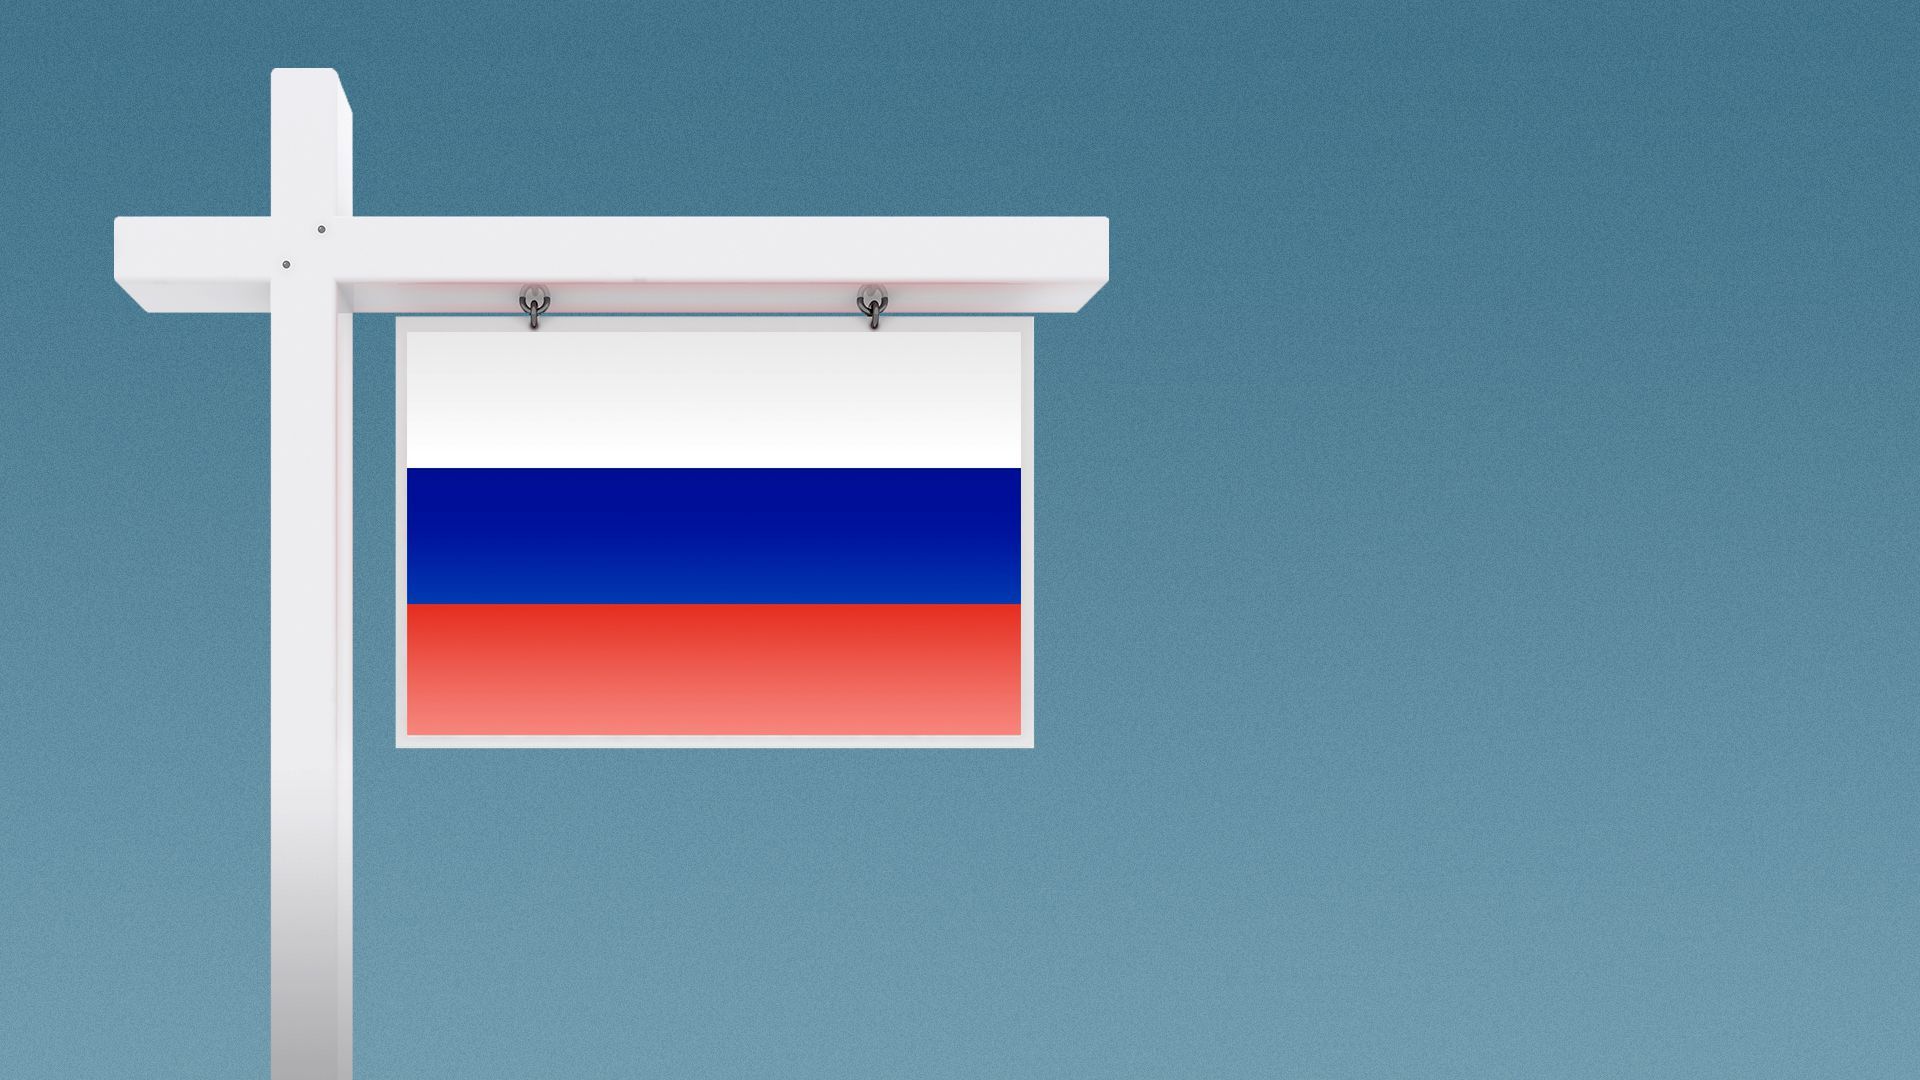 Real estate for sale sign frame hanging a Russian flag